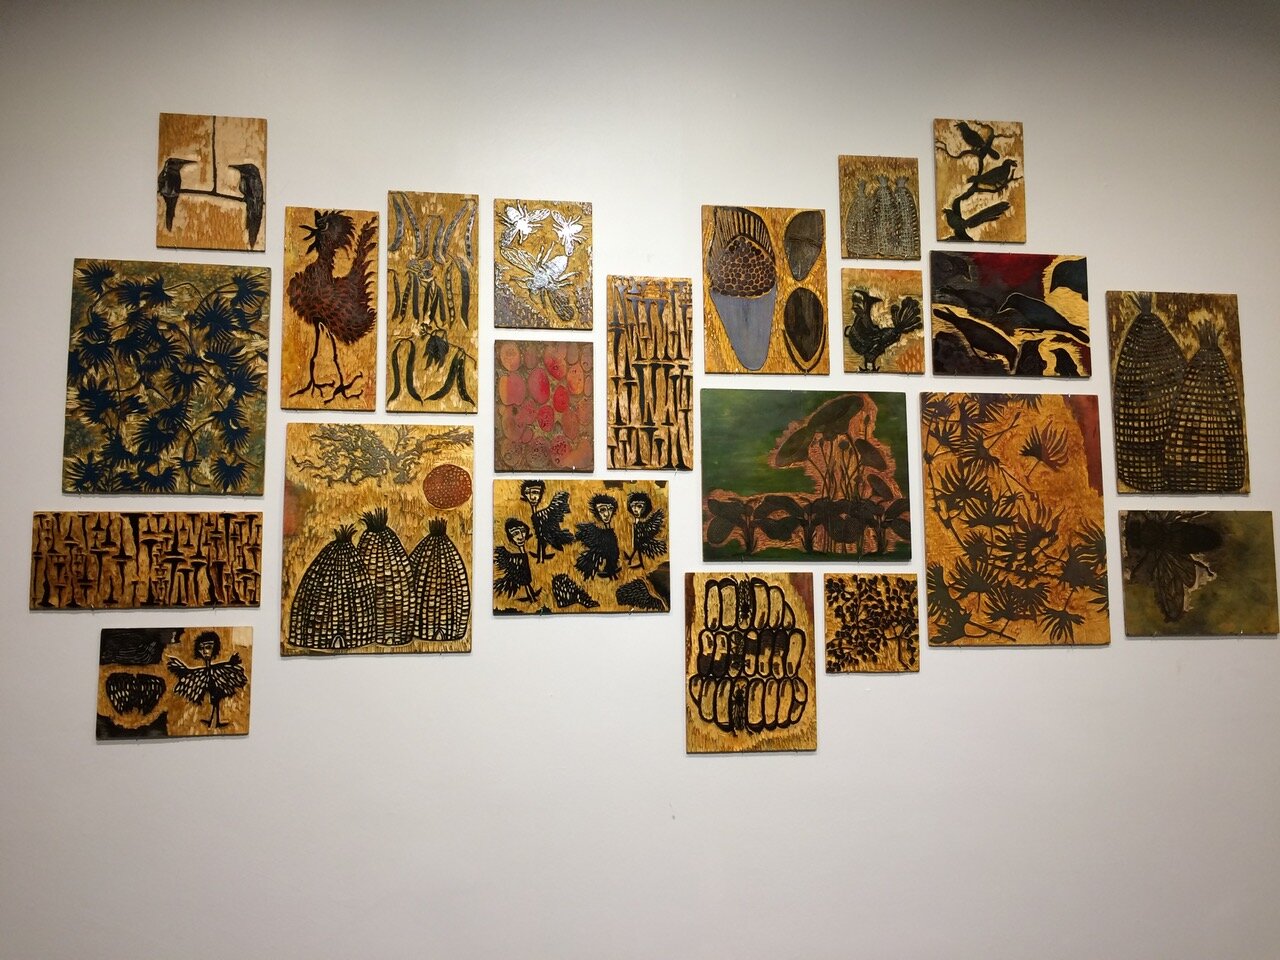 Wall of 22 carved woodblocks